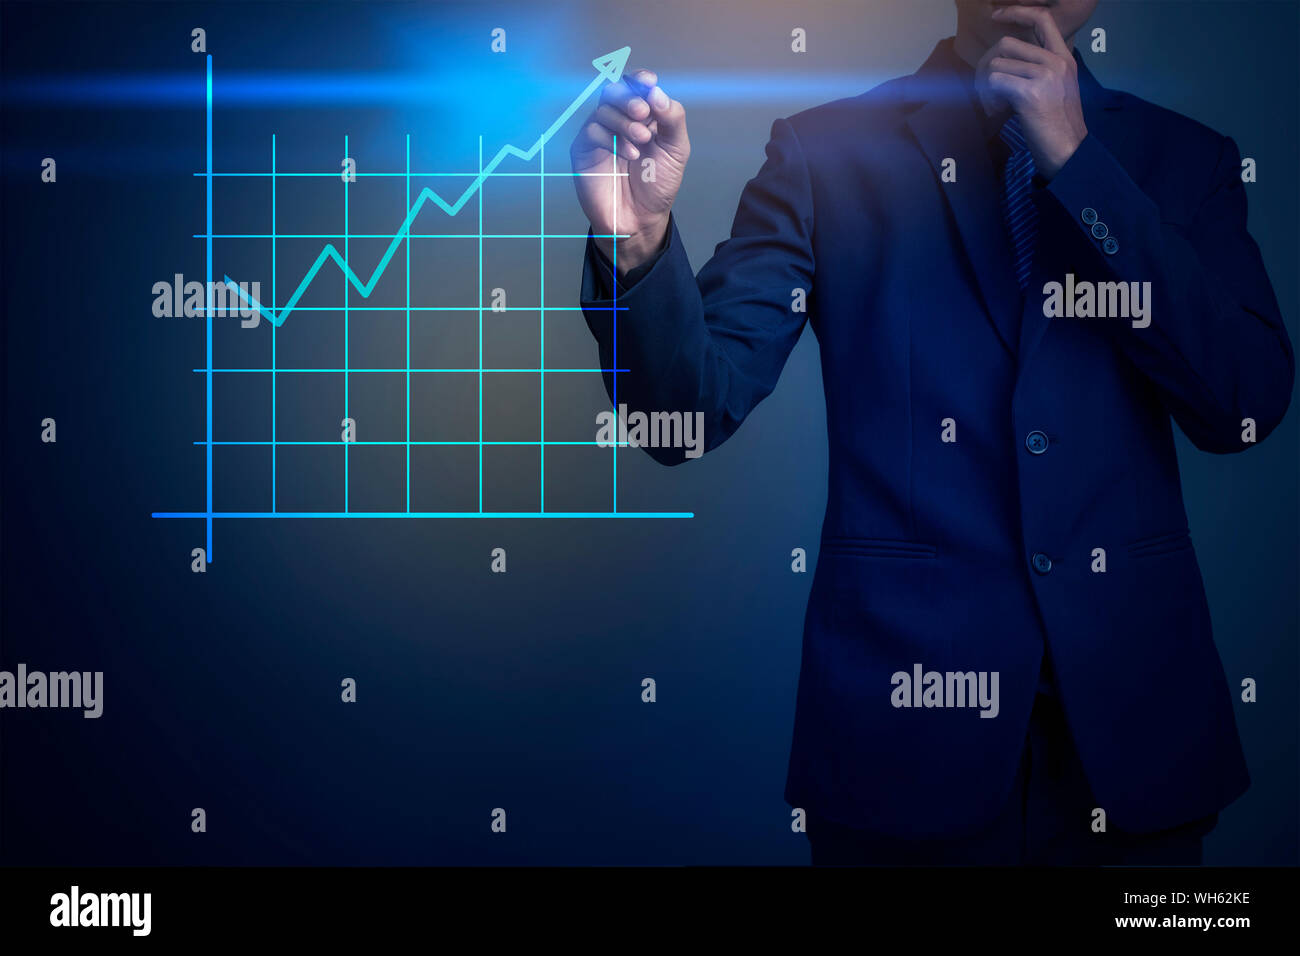 Midsection Of Businessman Analyzing Data Against Colored Background Stock Photo